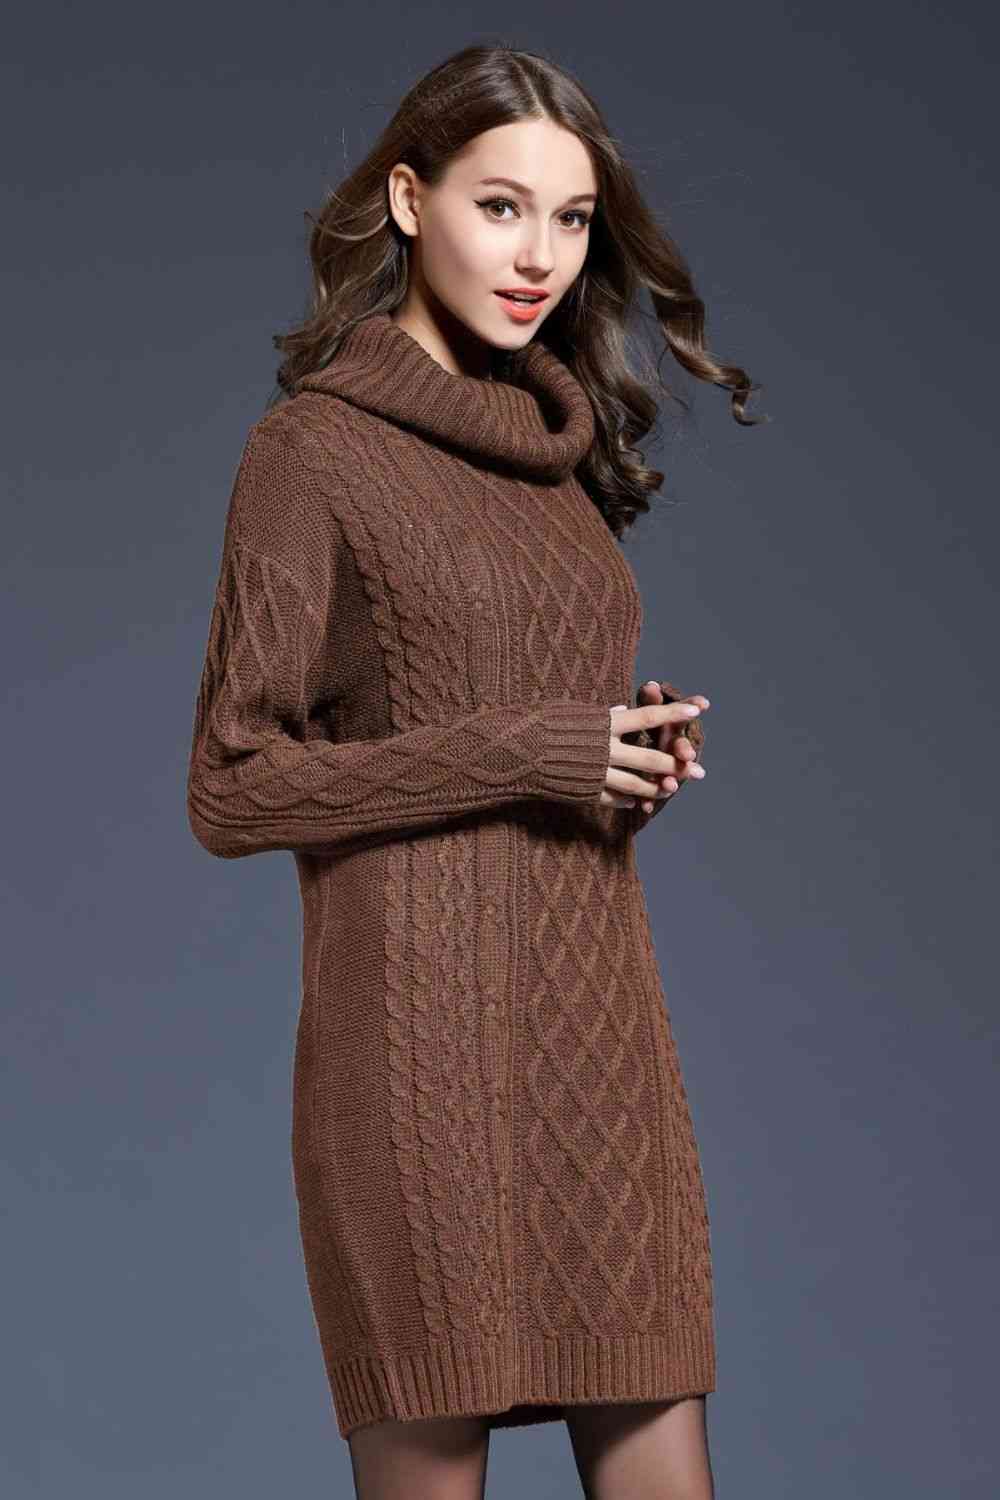 Woven Right Full Size Mixed Knit Cowl Neck Dropped Shoulder Sweater Dress - Guy Christopher 